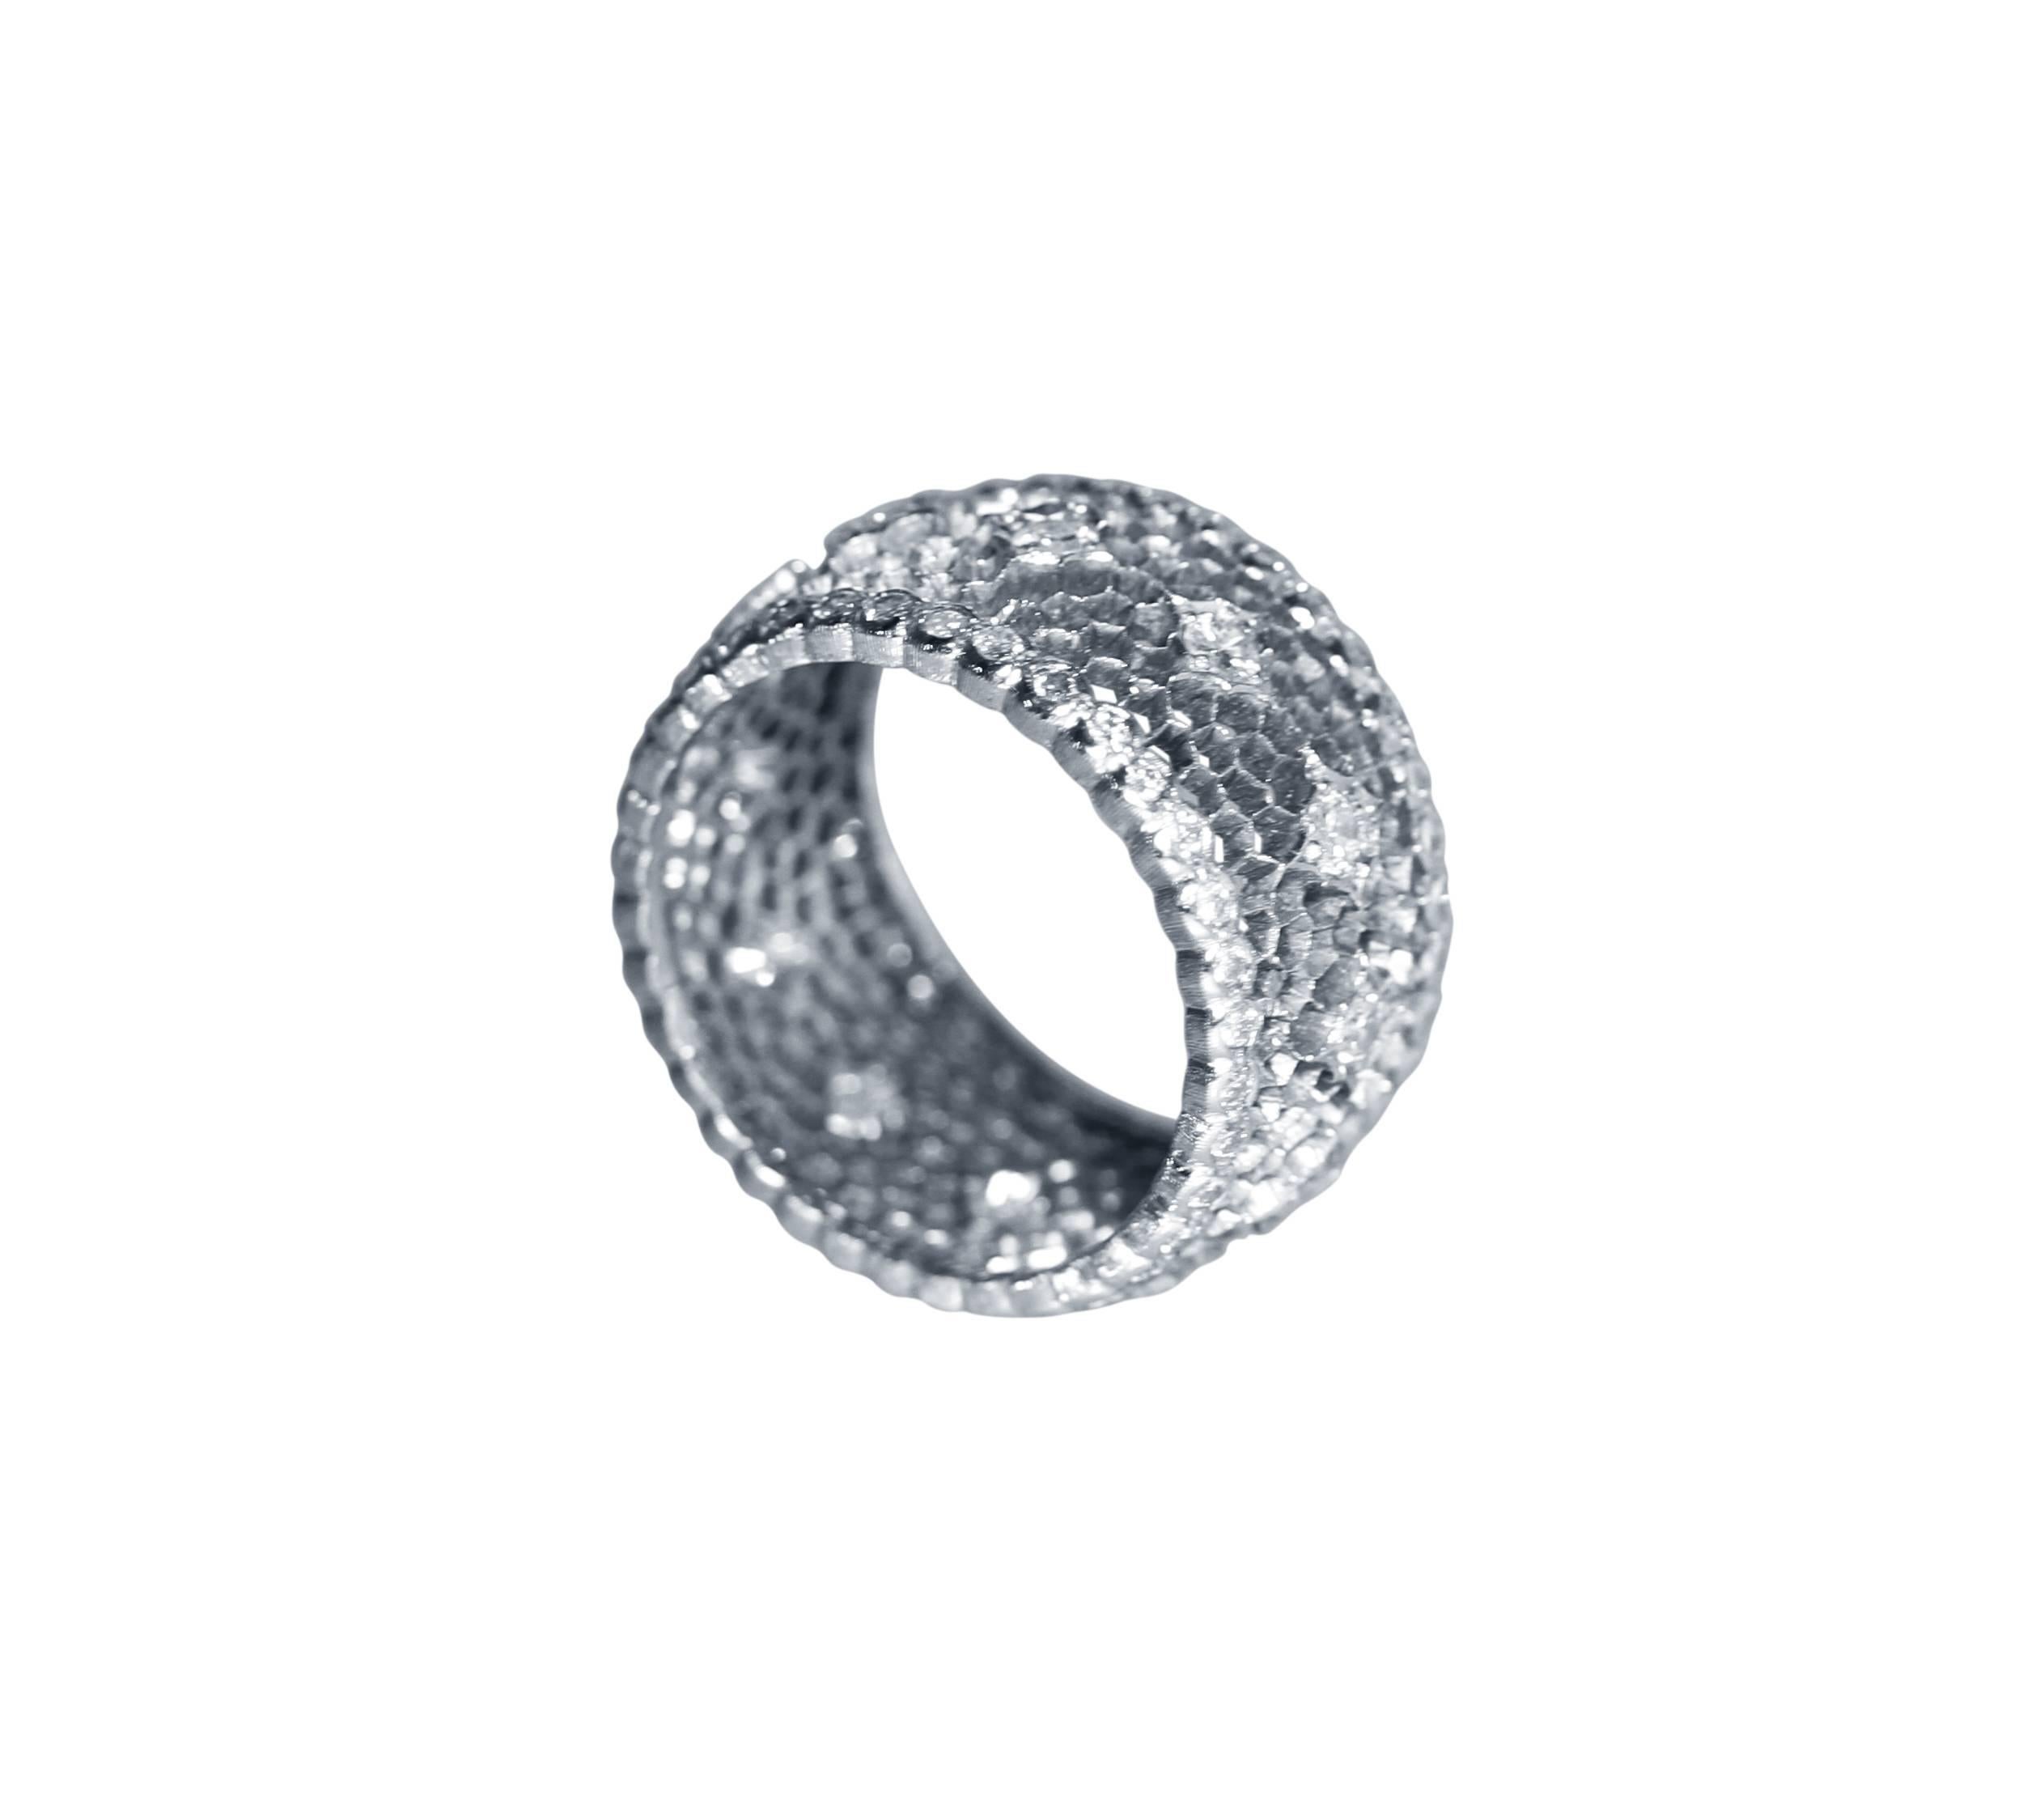 An 18 karat white gold and diamond 'tulle' band ring by Buccellati, Italy, the wide band of openwork design set with 84 round diamonds weighing approximately 1.25 carats, width 3/8 inch, size 5, gross weight 4.5 grams, signed Gianmaria Buccellati,